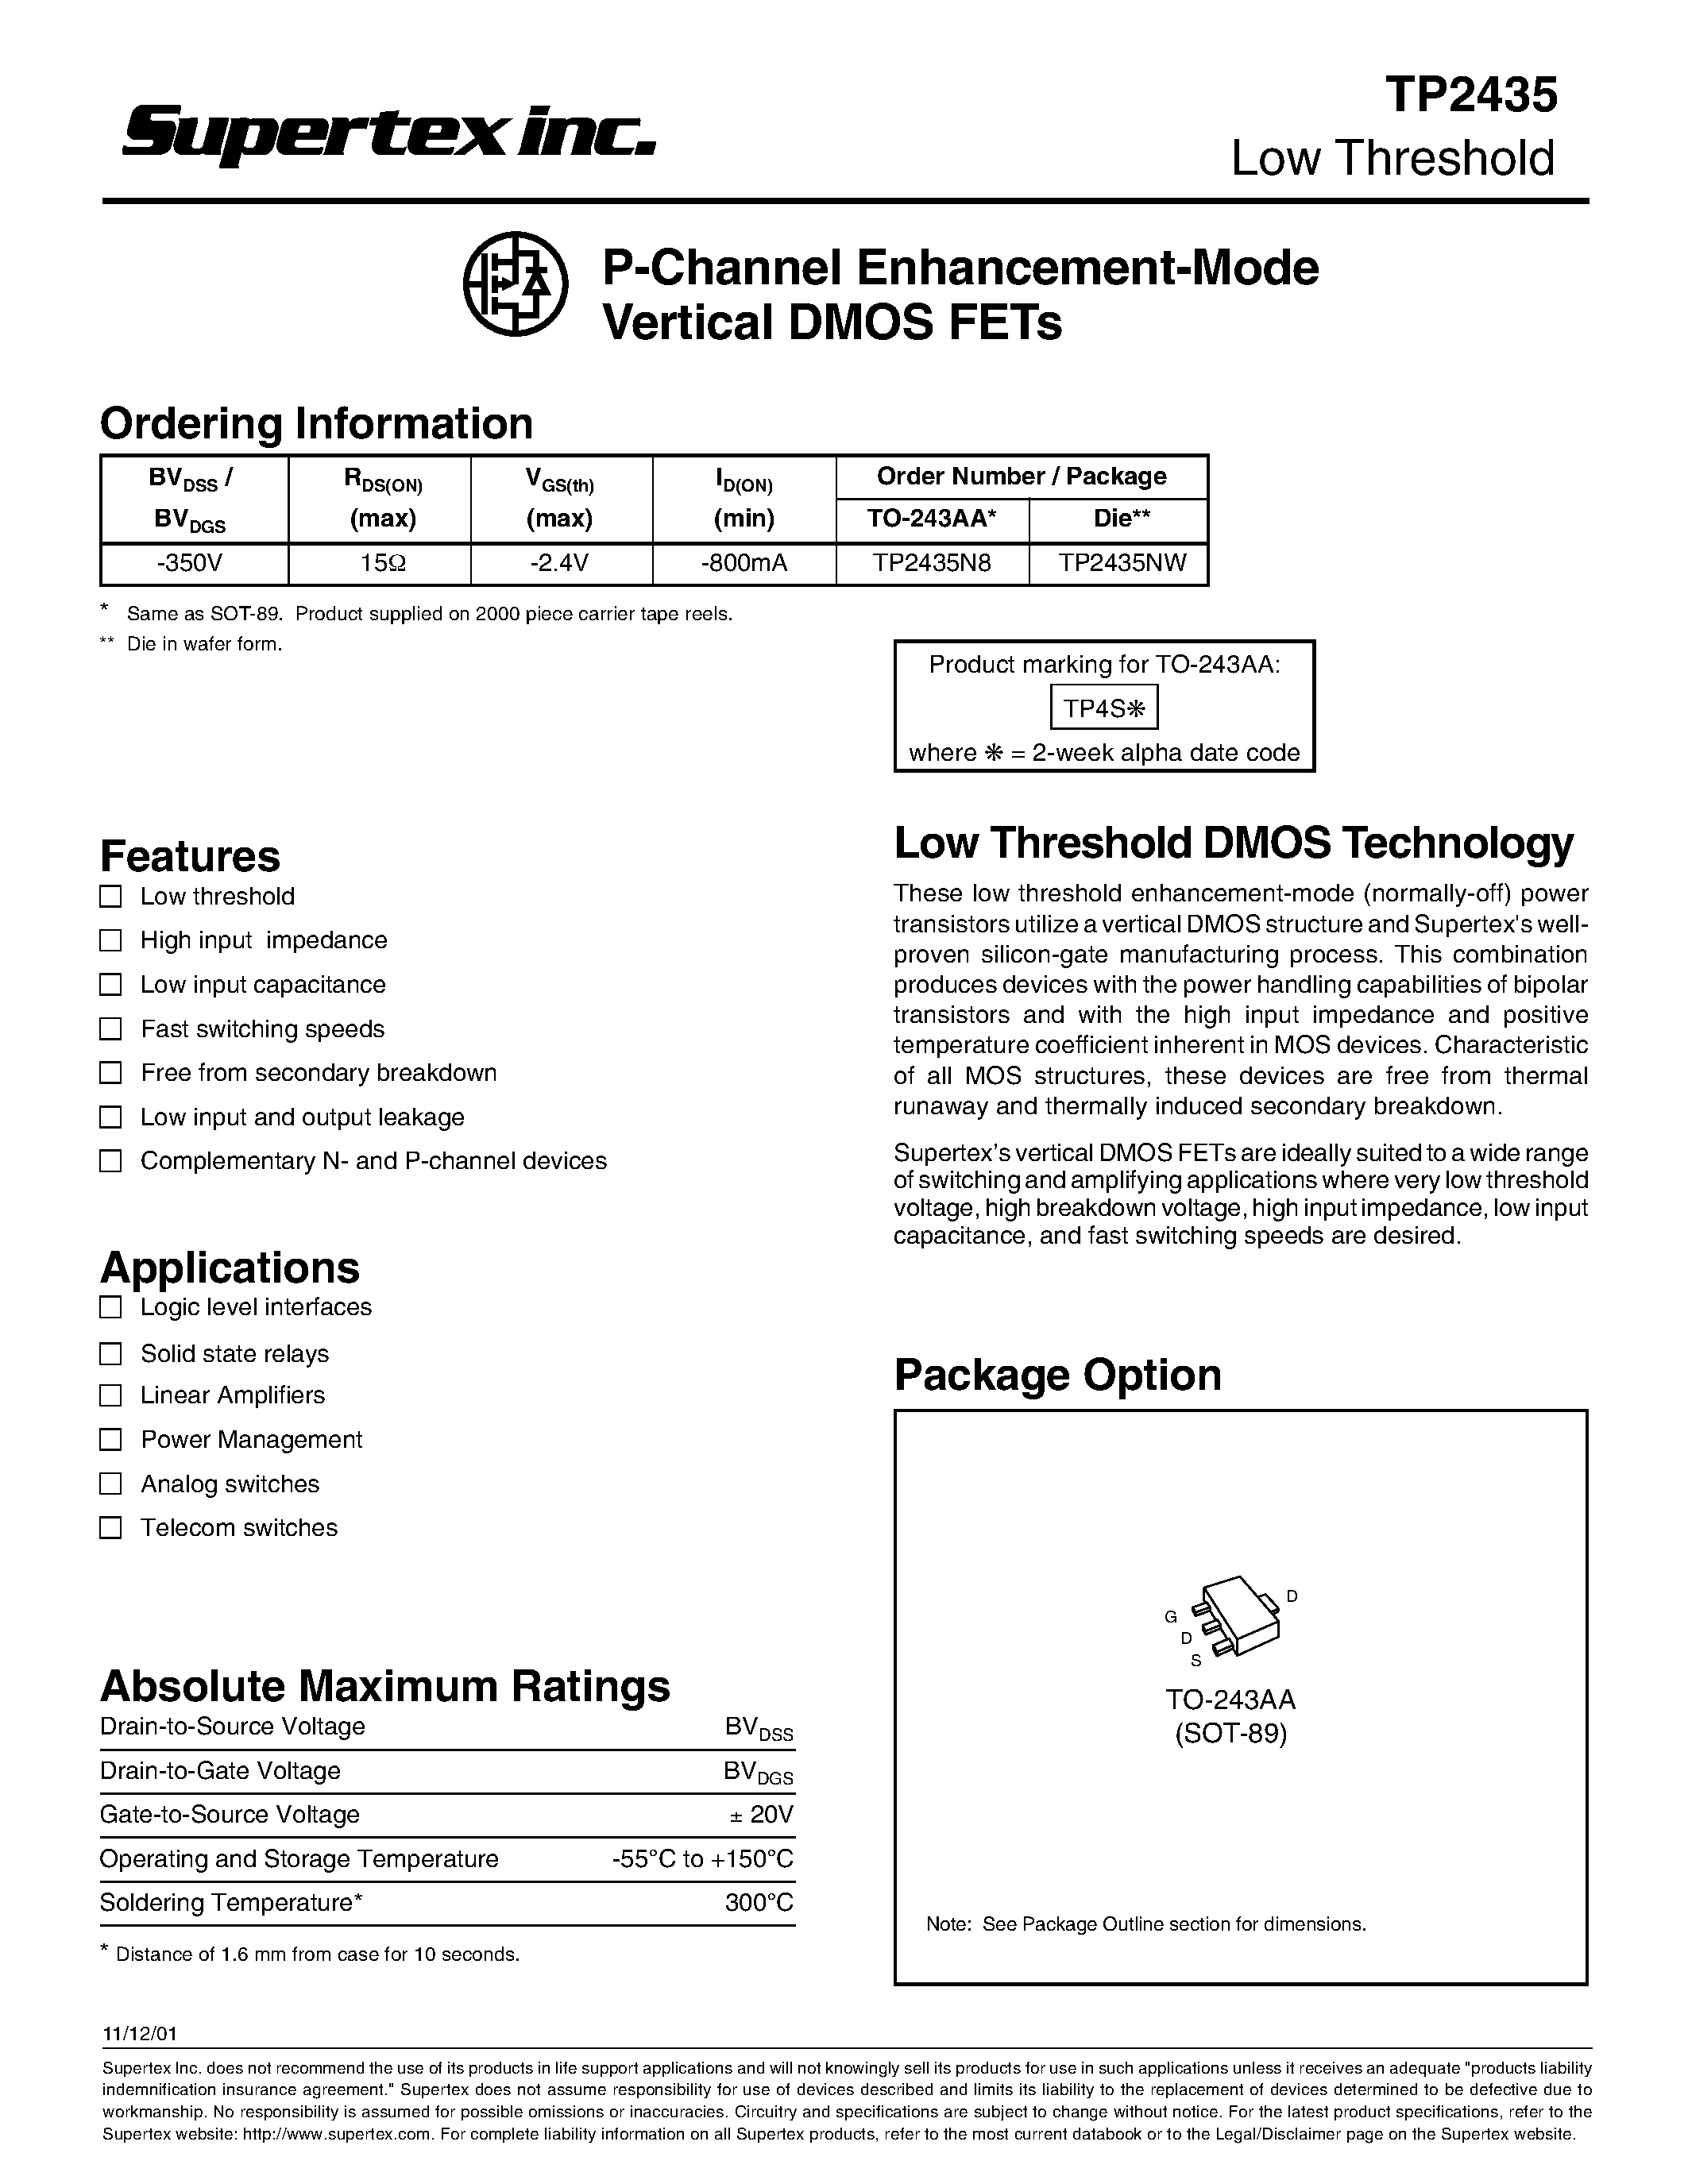 Datasheet TP2435NW - P-Channel Enhancement-Mode Vertical DMOS FETs page 1